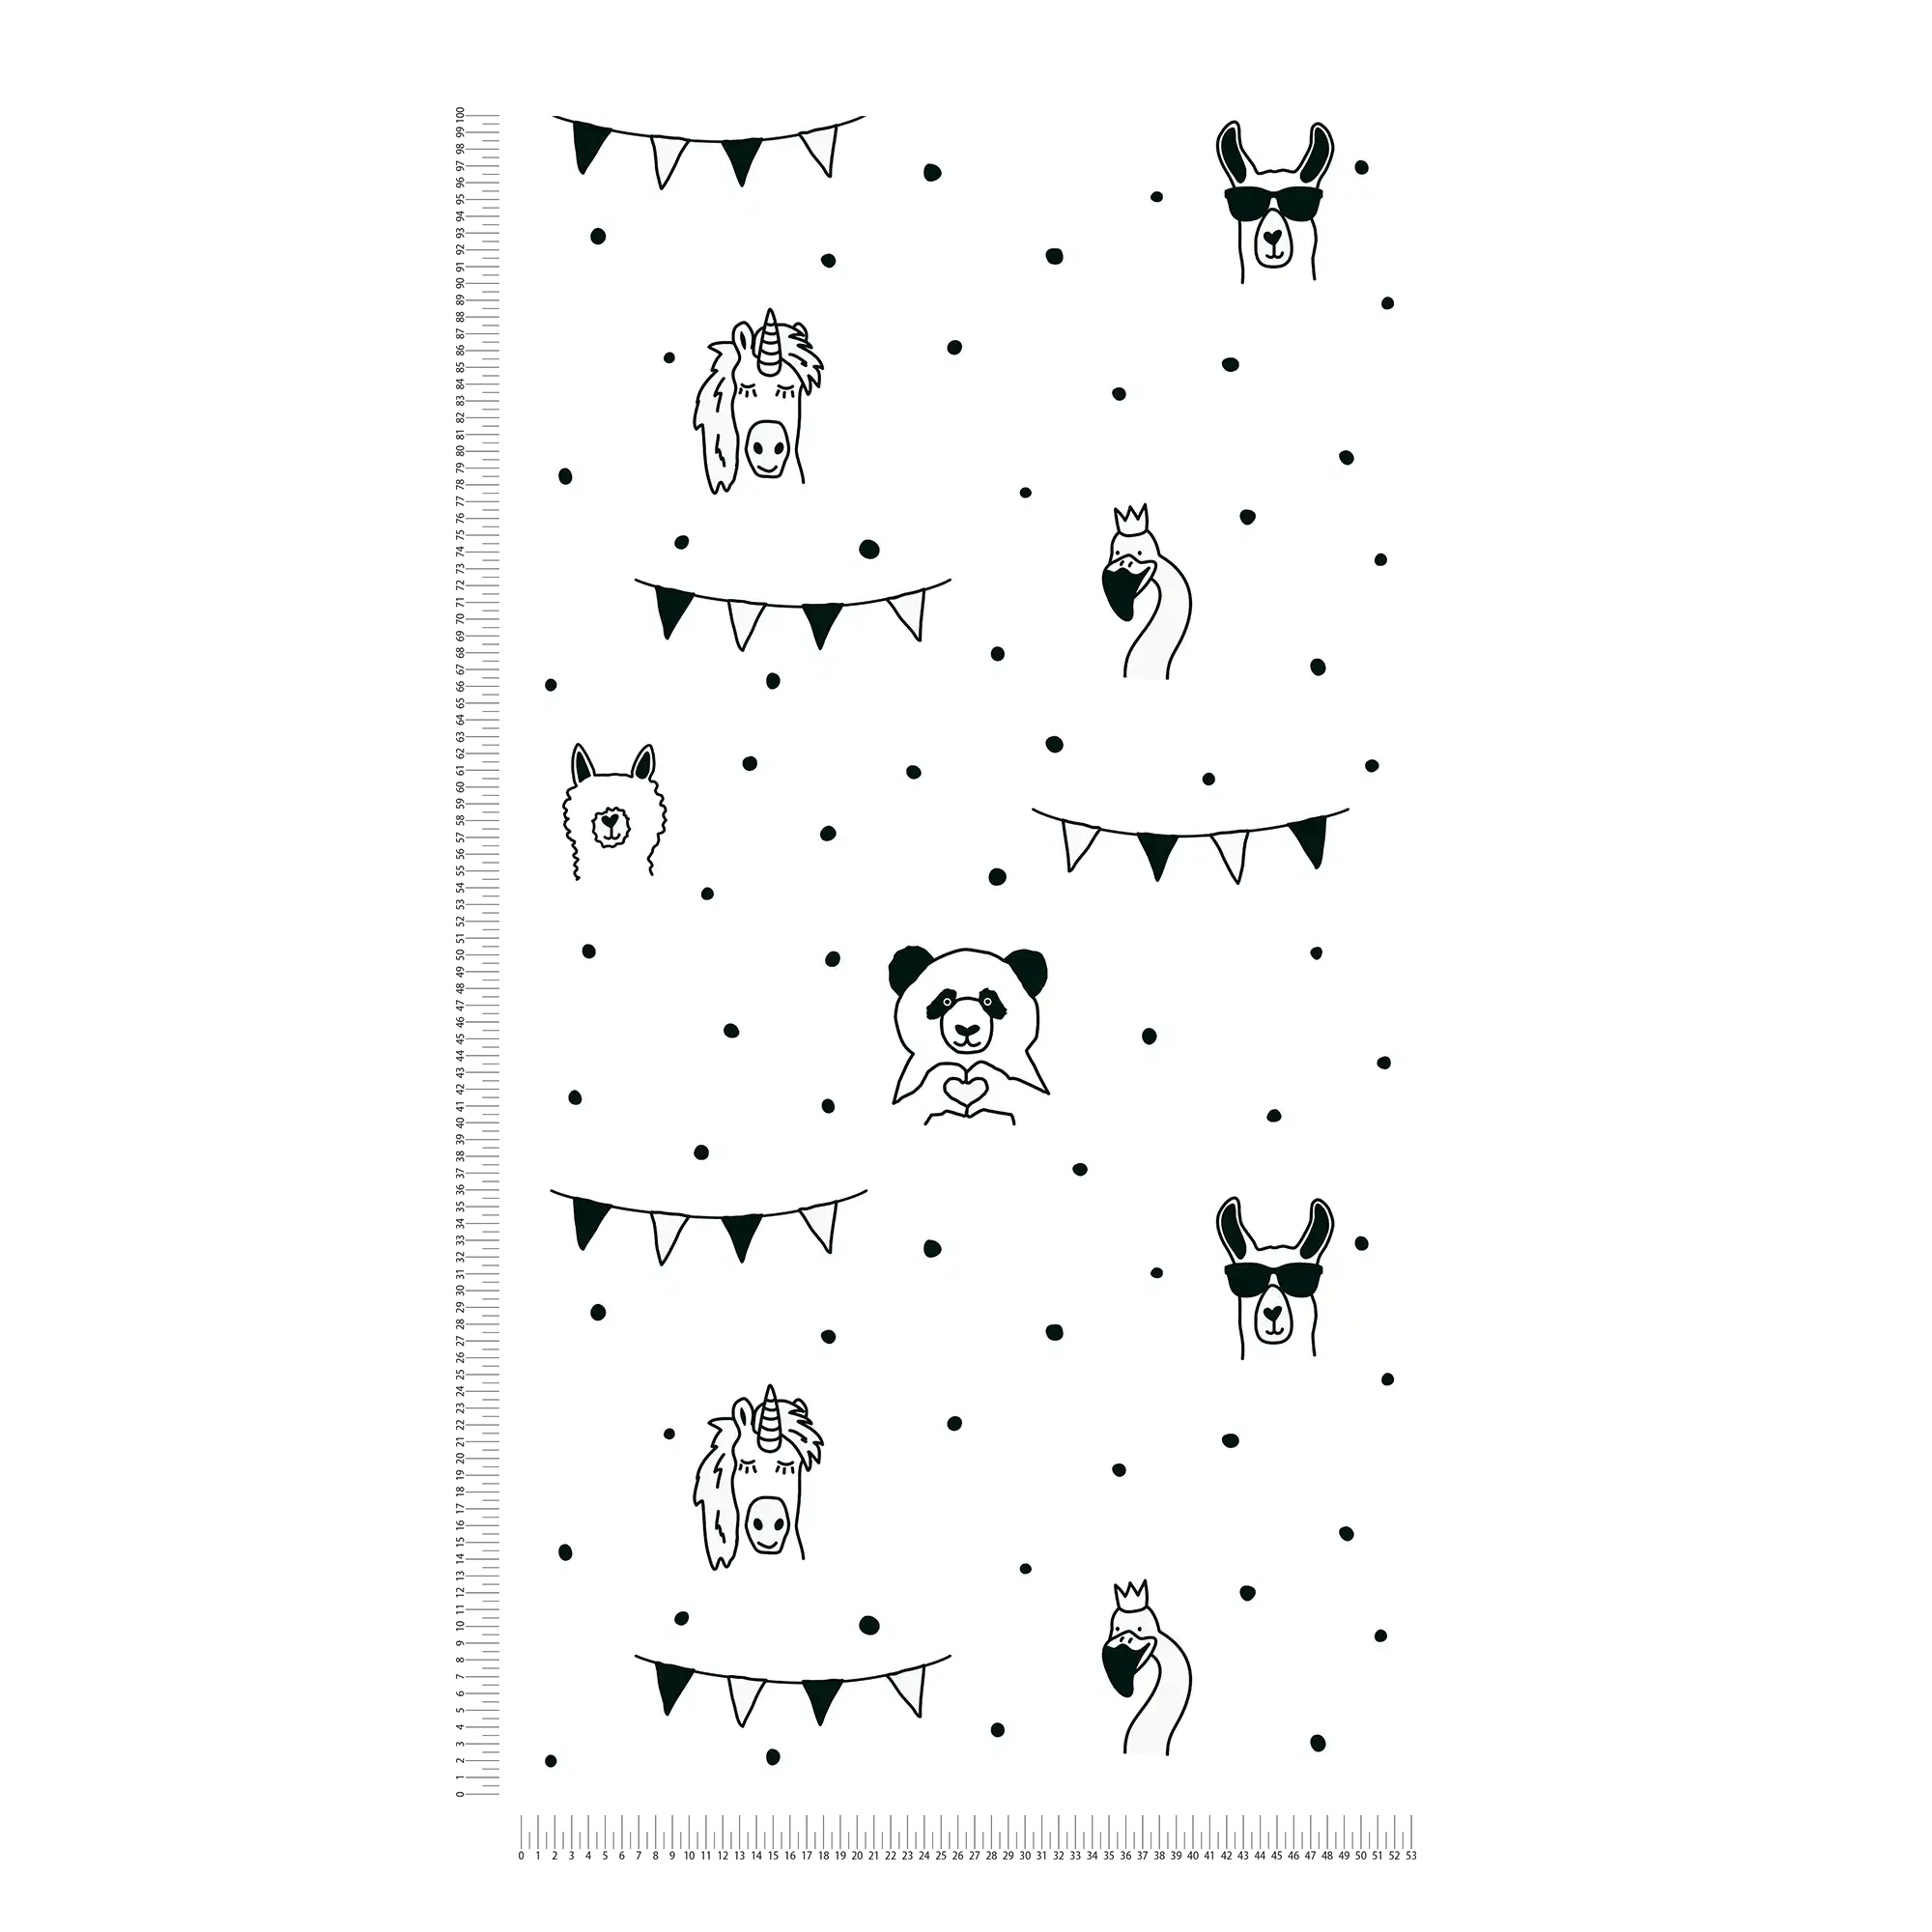             Black and white children wallpaper with animal & dots pattern
        